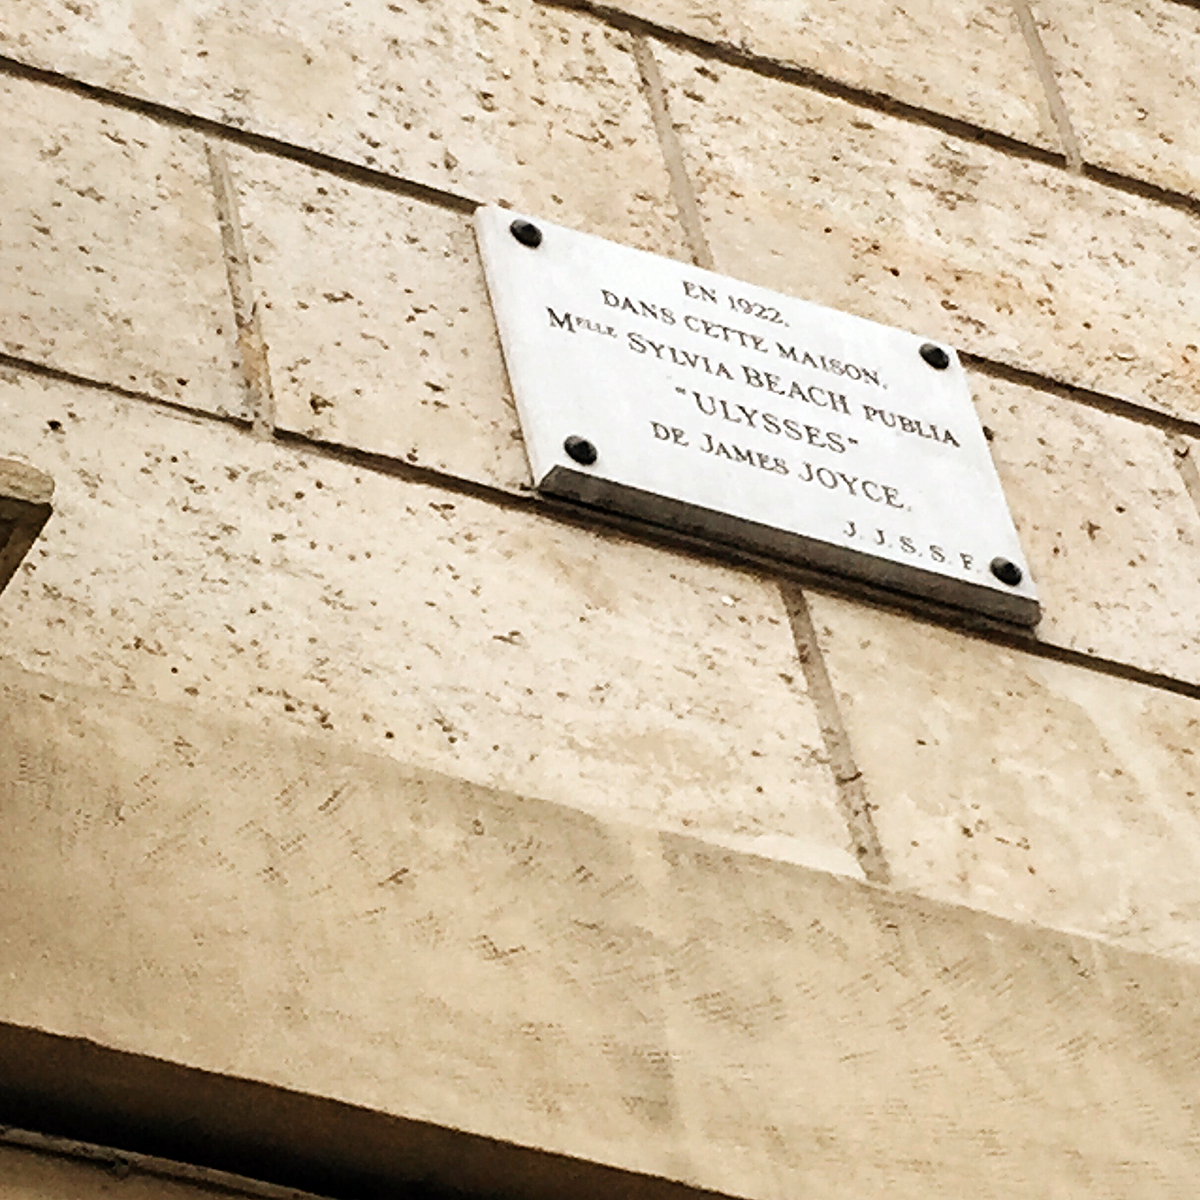 A historical placard commemorating the publication of 'Ulysses' by Sylvia Beach